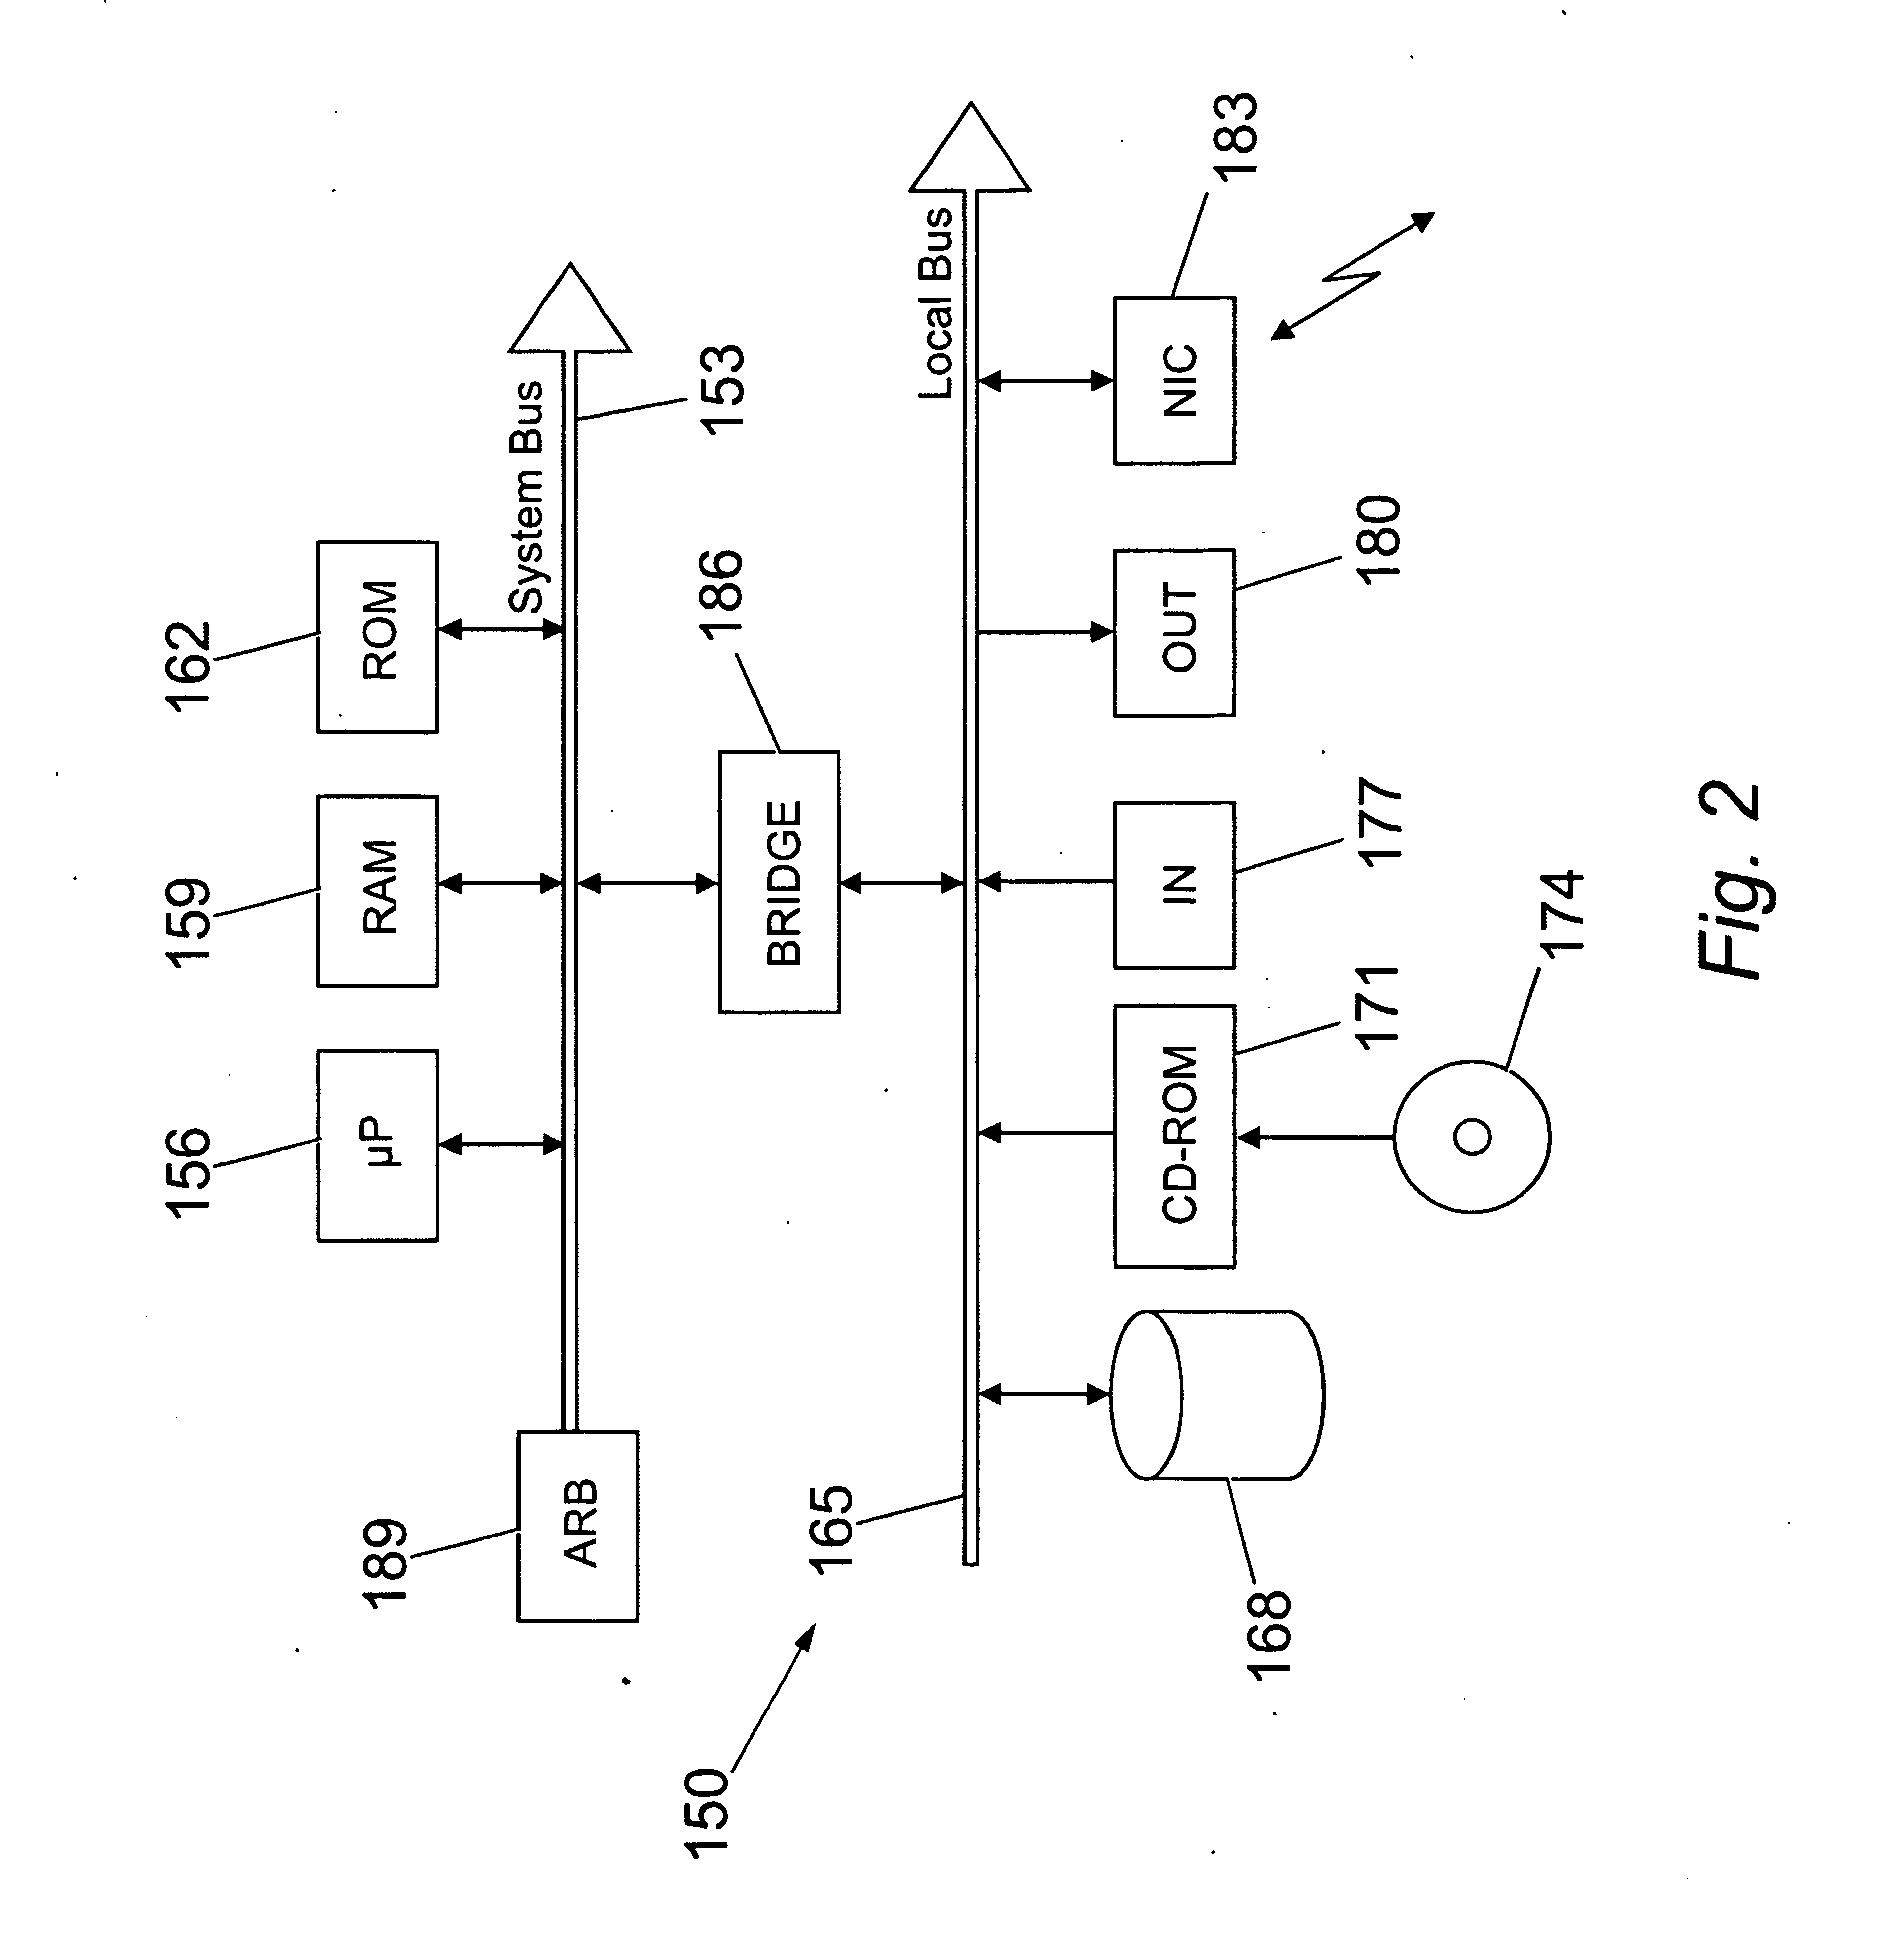 Method and System for Monitoring Road Surface Conditions